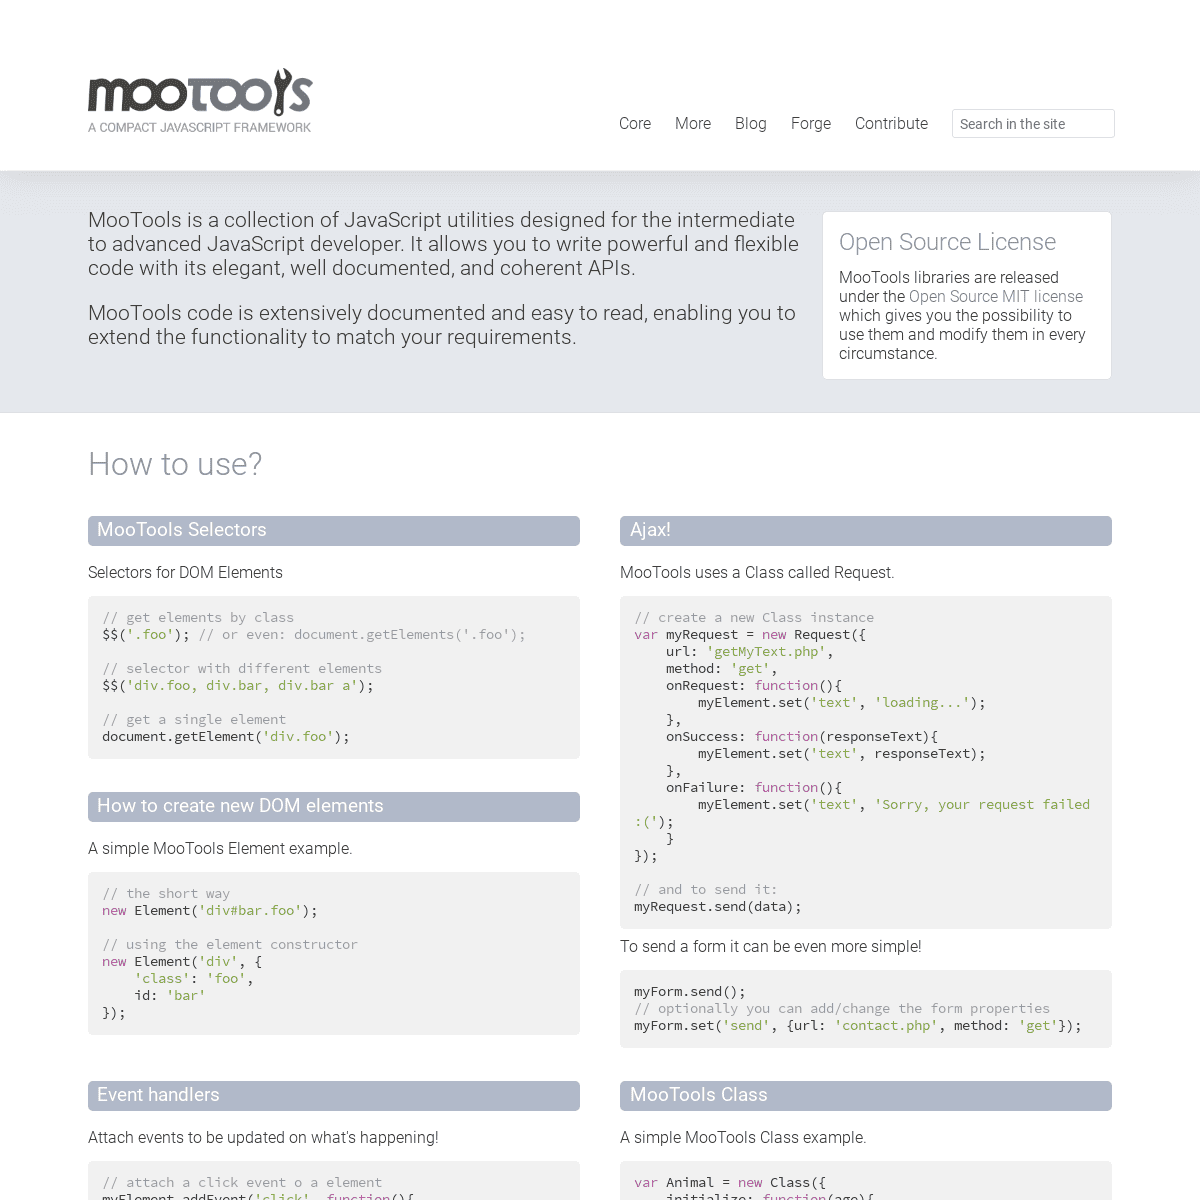 A complete backup of mootools.net